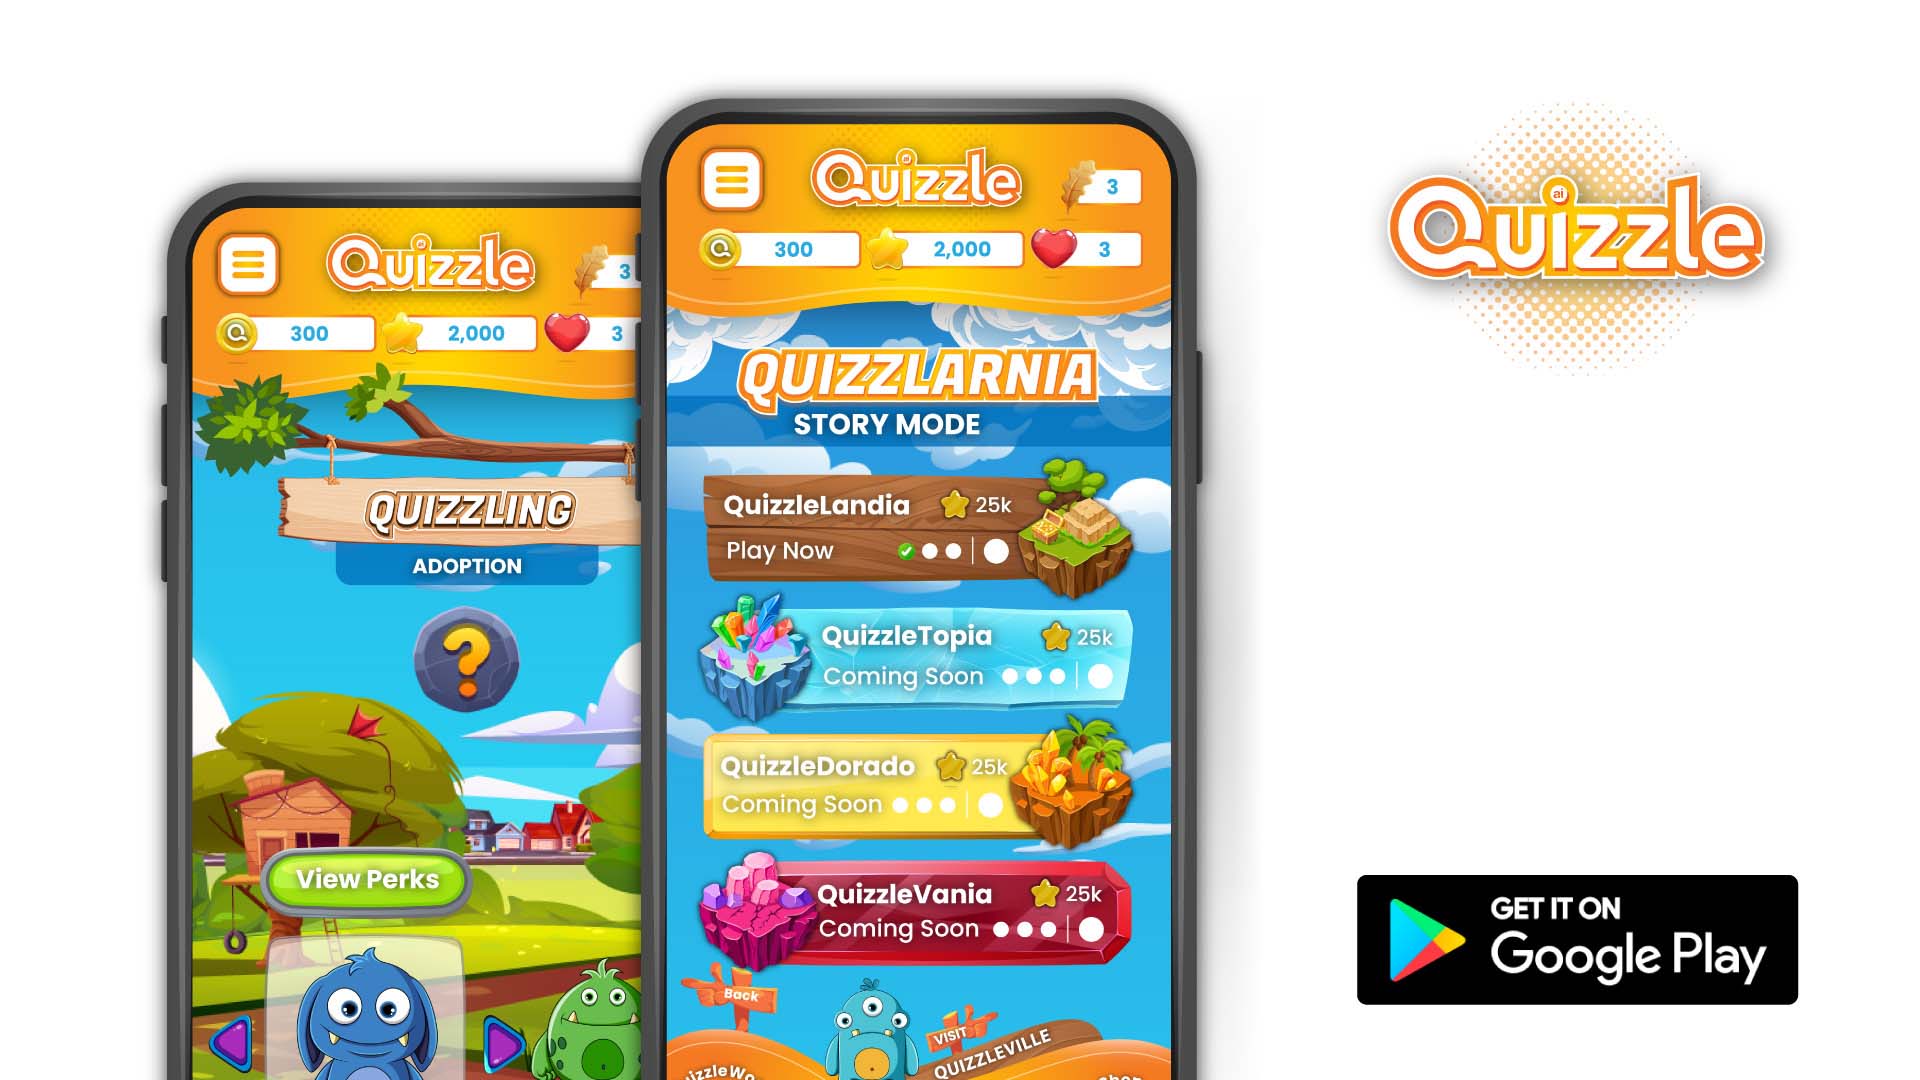 The Quizzle Game App brought to you by Identity Pixel - App Design & Development in Essex